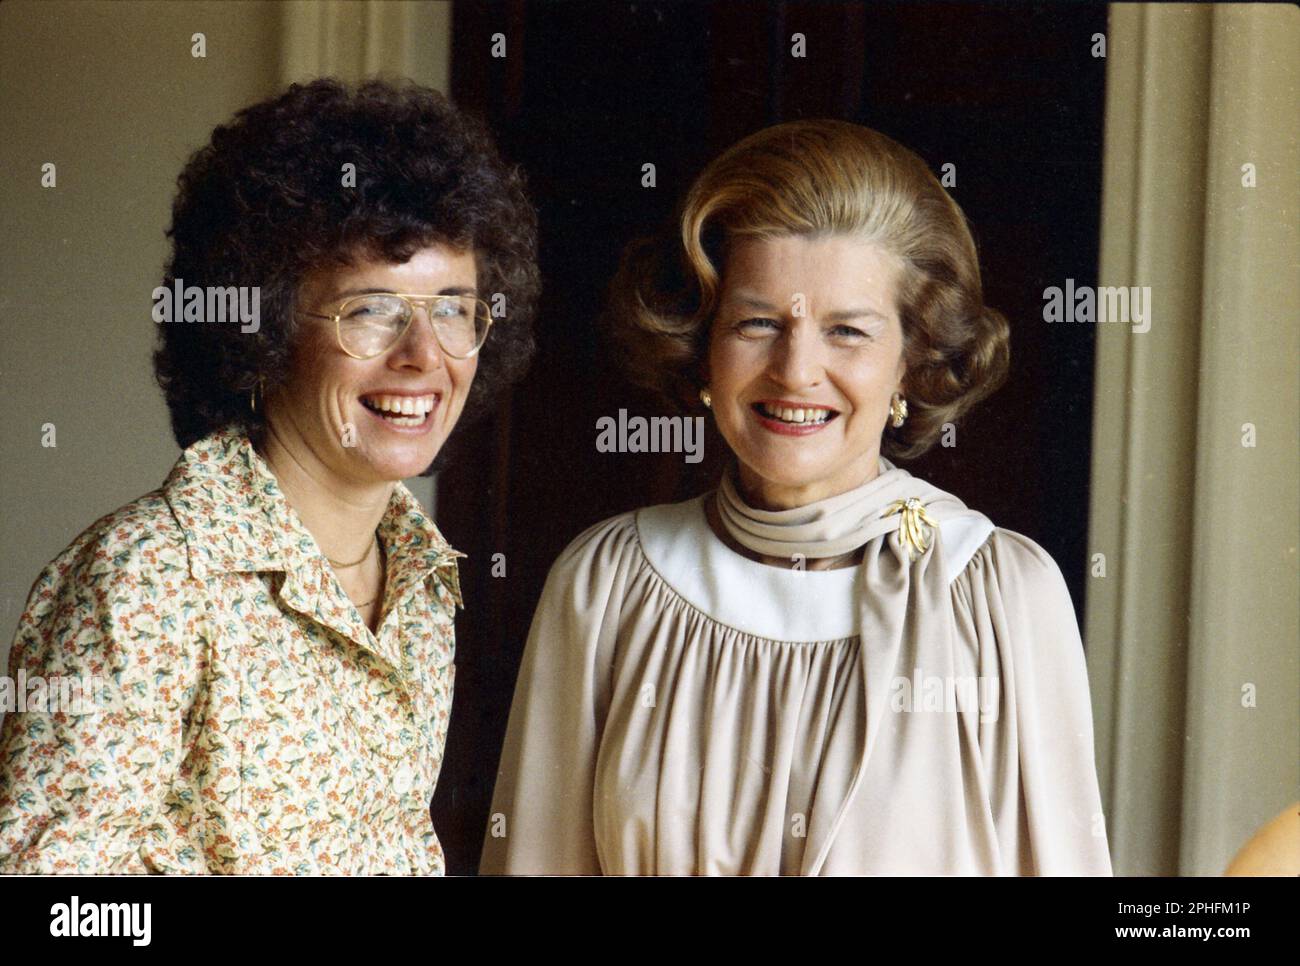 Billie Jean King, professional tennis player and Wimbledon Champion, poses with First Lady Betty Ford at the White House, Washington, DC, 7/21/1975. (Photo by White House Photo Collection Stock Photo